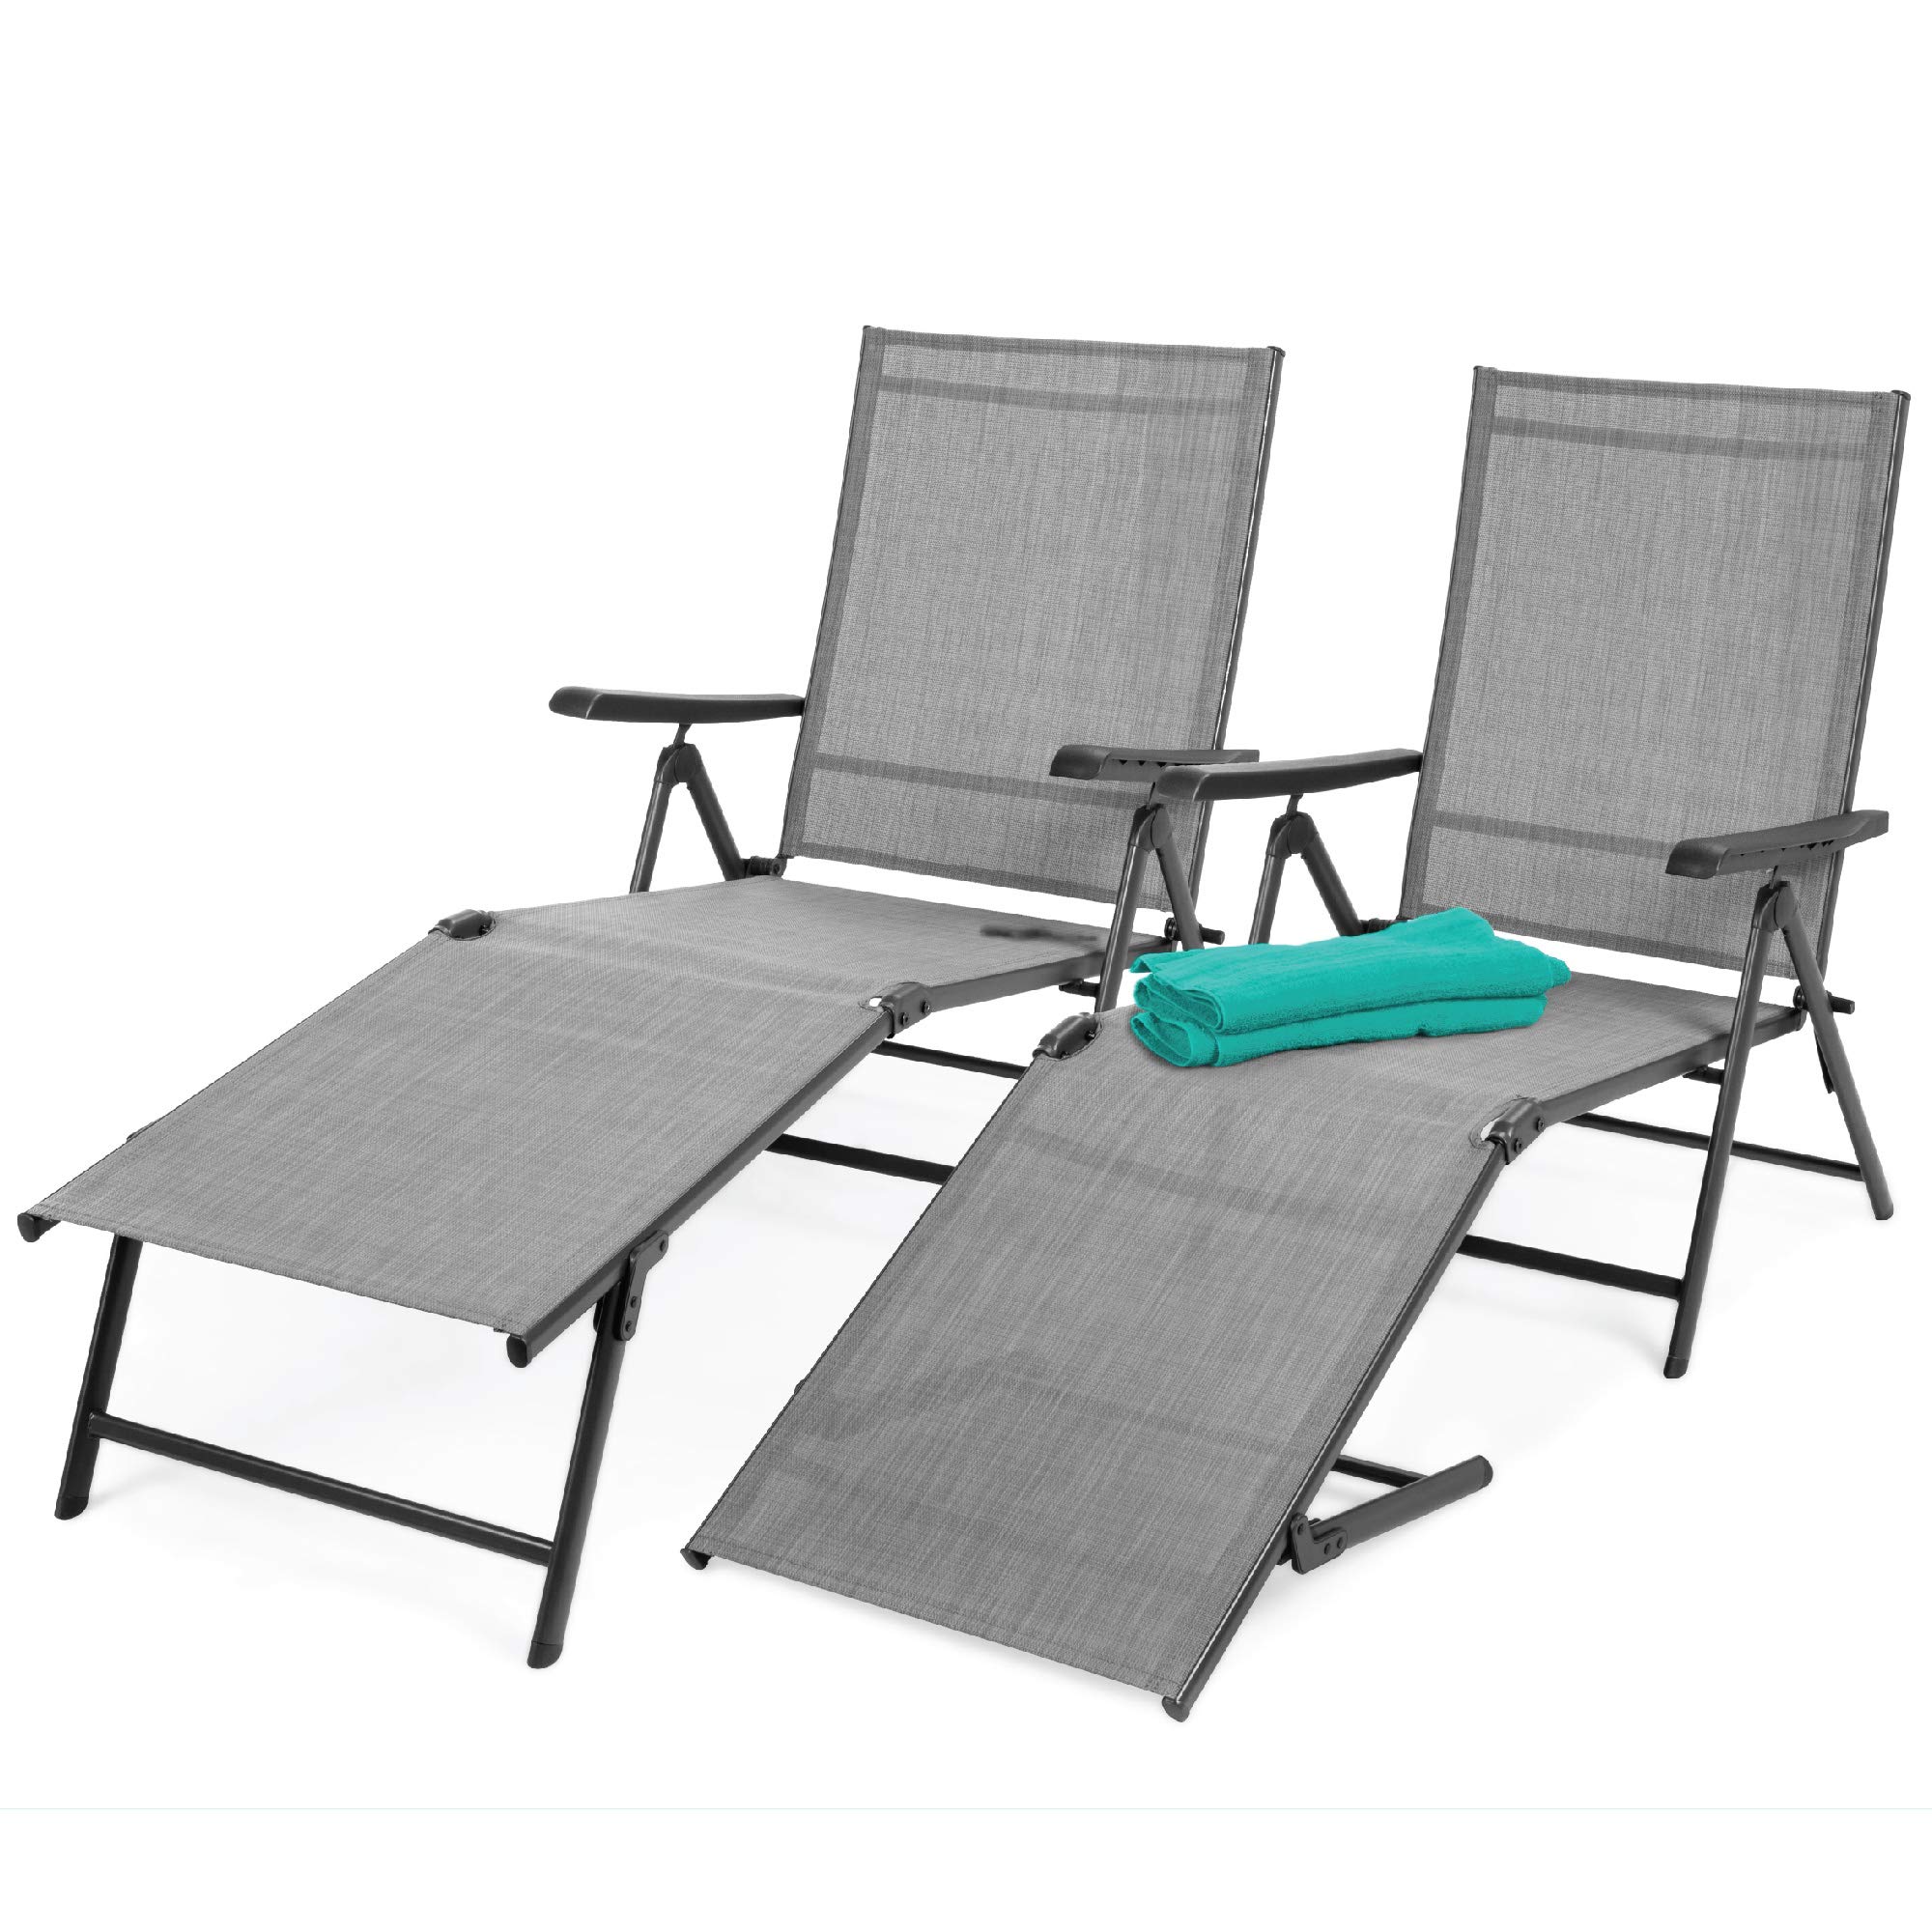 Best Outdoor Lounge Chairs for Seniors Is This Set of 2 Outdoor Patio Chaise Lounge Chair